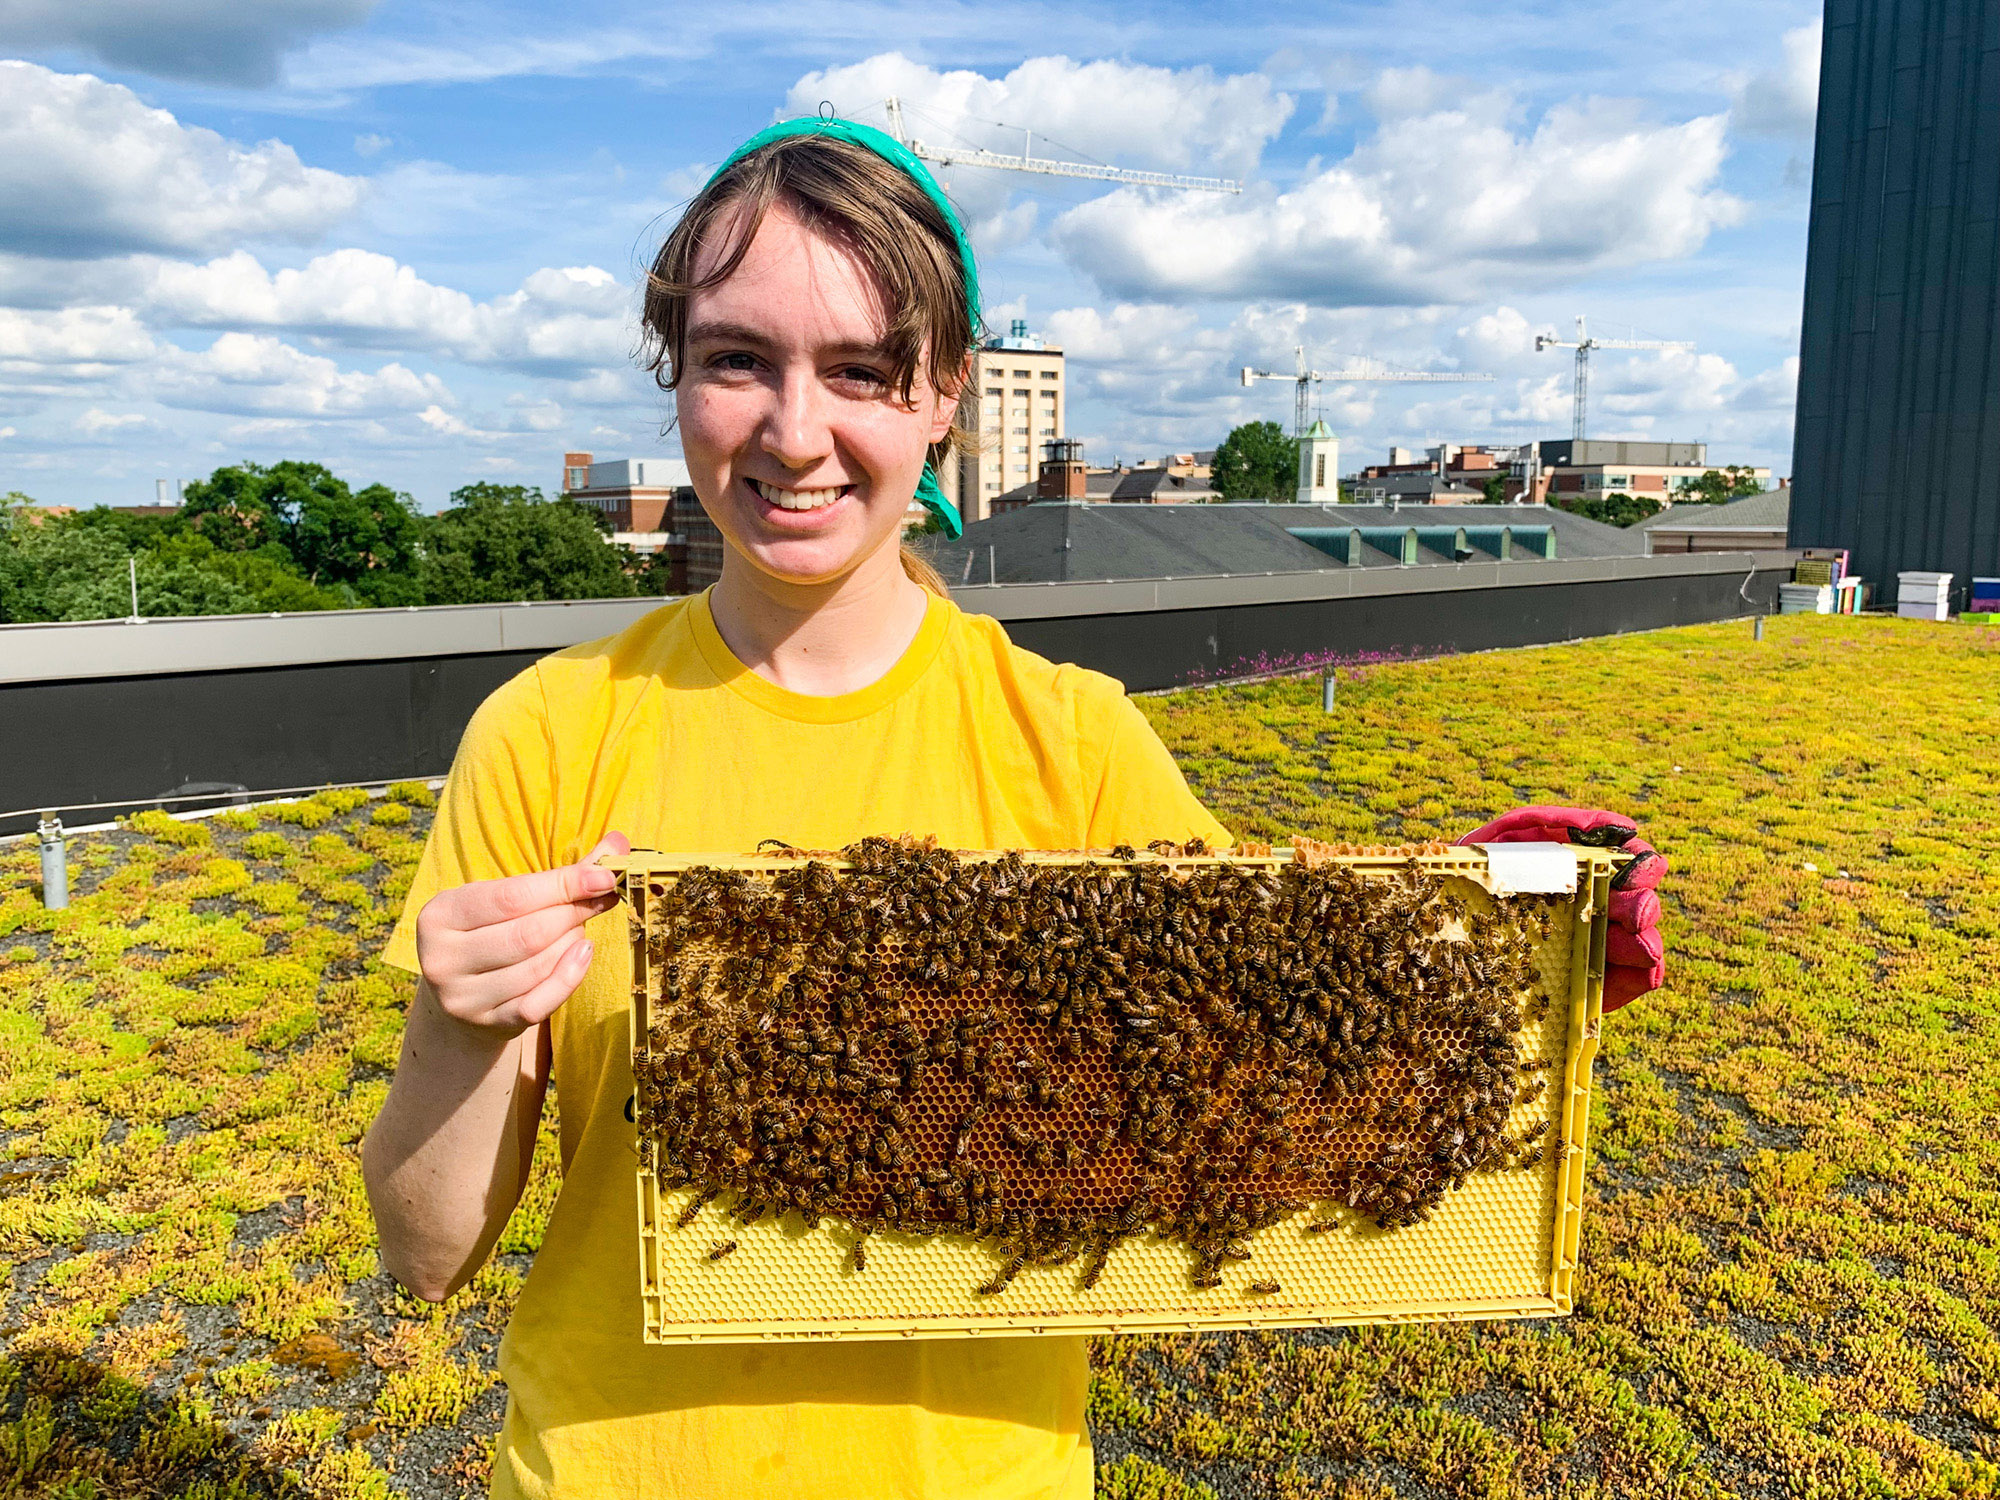 Addie Wilson dressed in yellow Tshirt smiles at the camera while holding a piece of equipment containing bees.